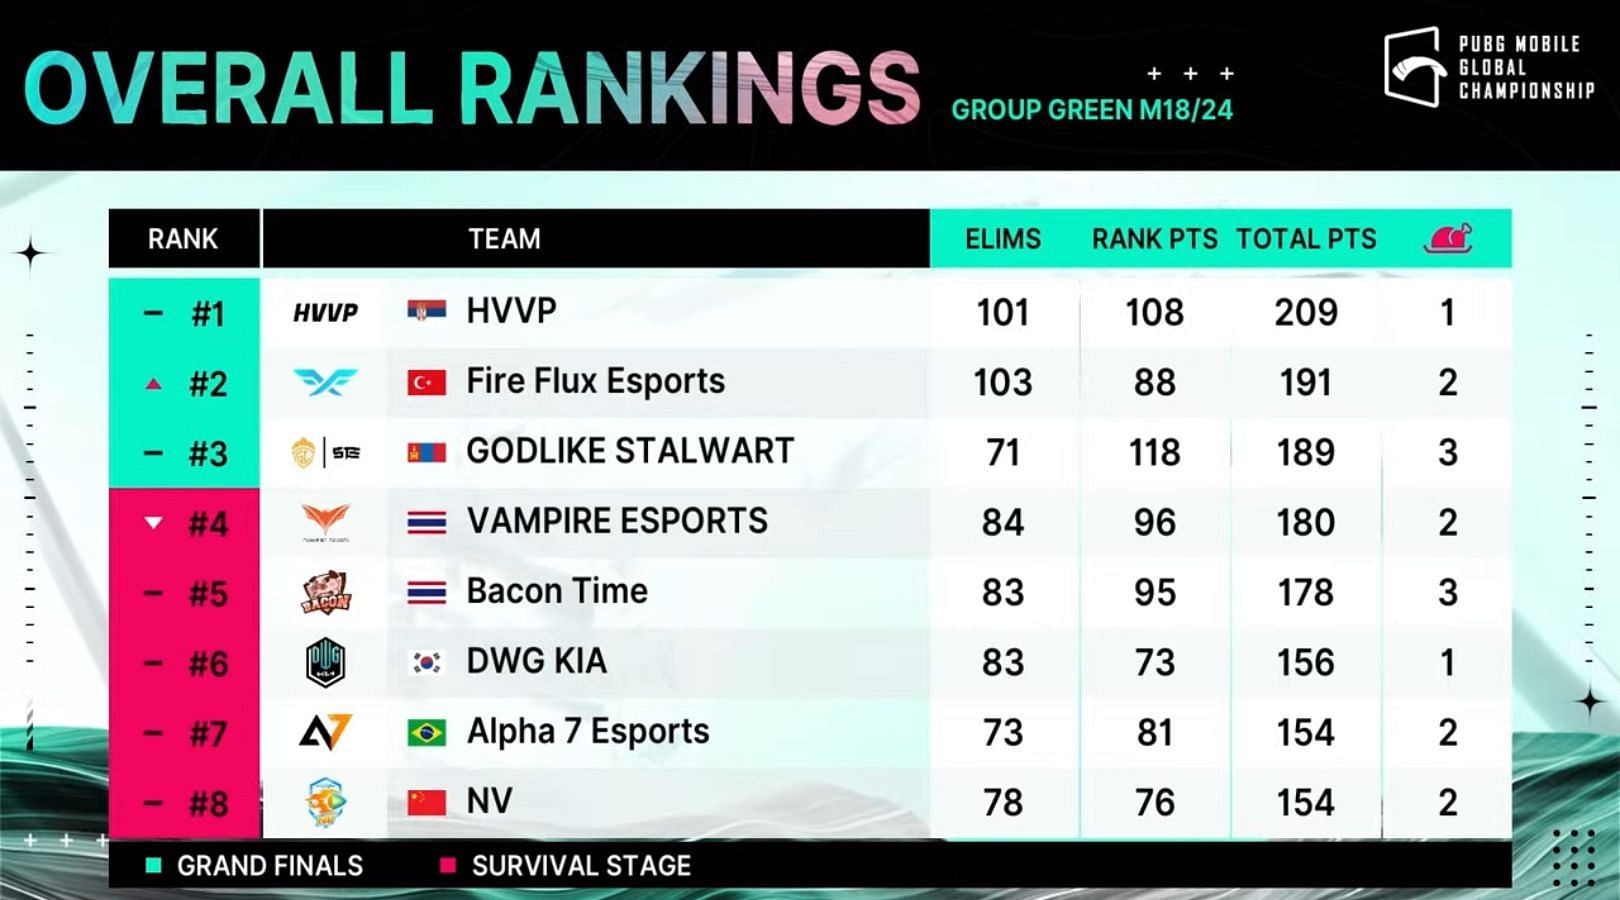 Top 8 teams rankings after 18 matches of PMGC Group Green (Image via PUBG Mobile)